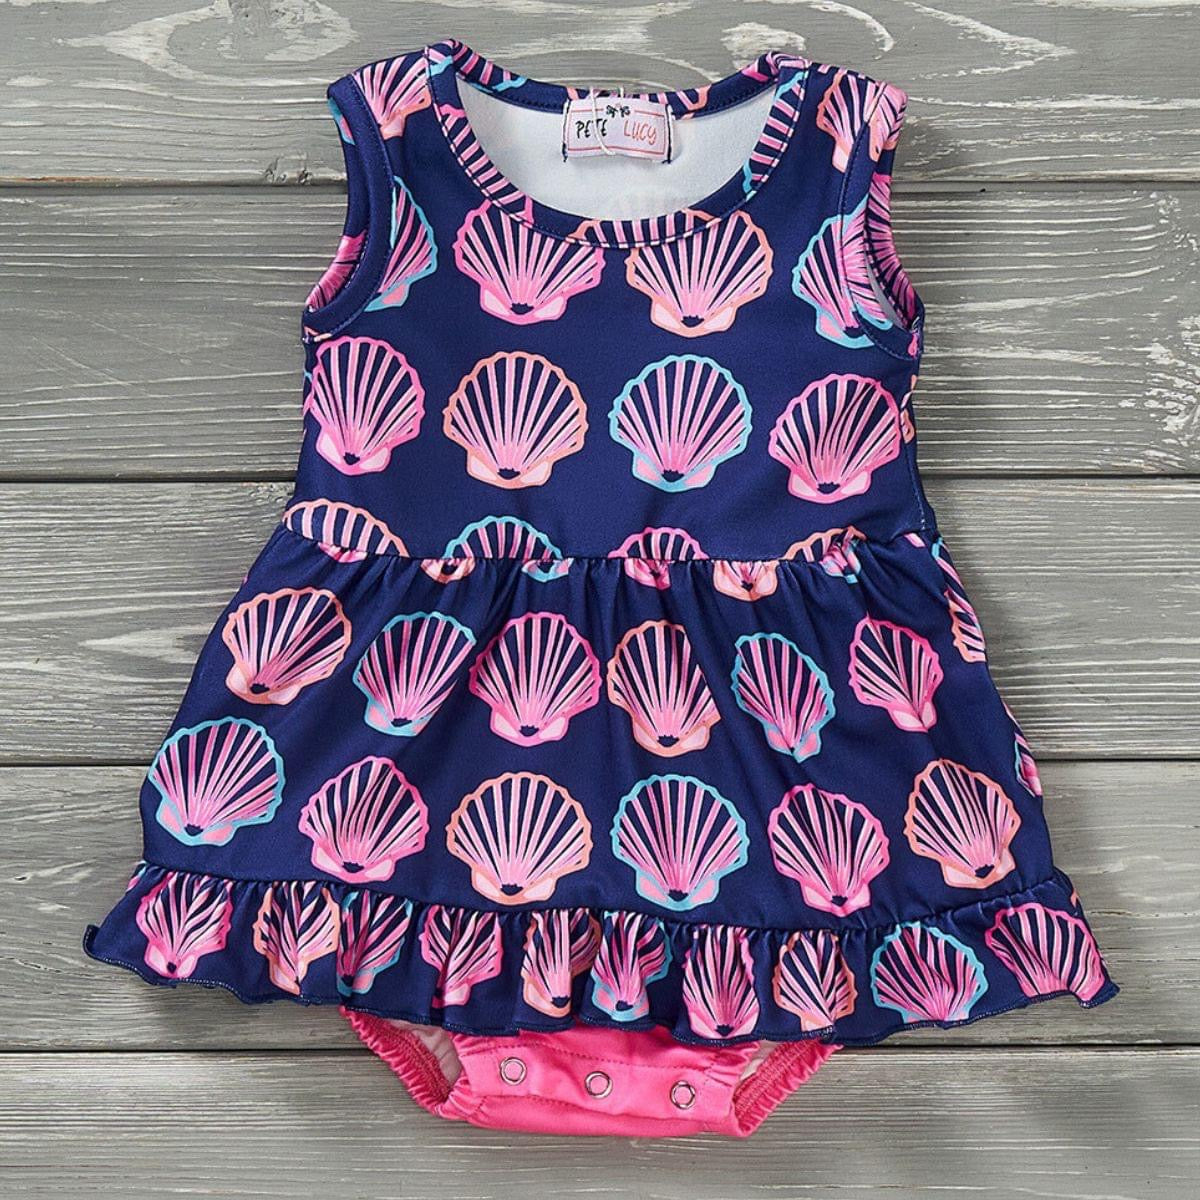 Sea Blush Treasures Baby Romper by Pete and Lucy